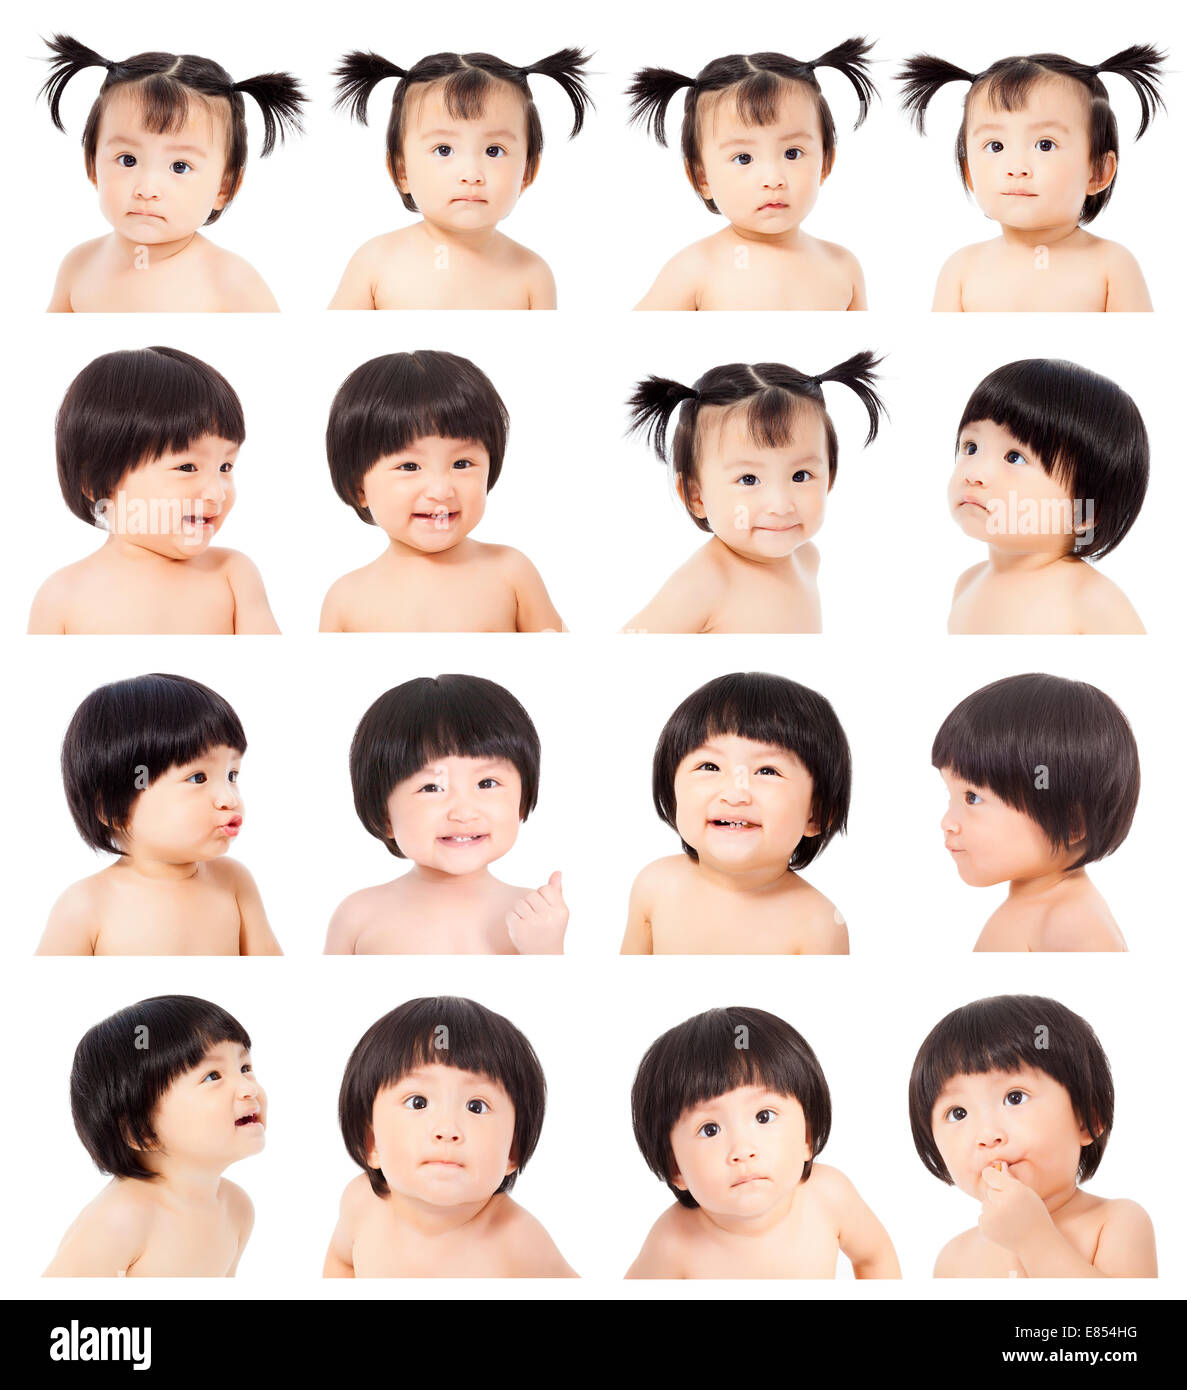 asian cute baby girl making different facial expressions over white background Stock Photo